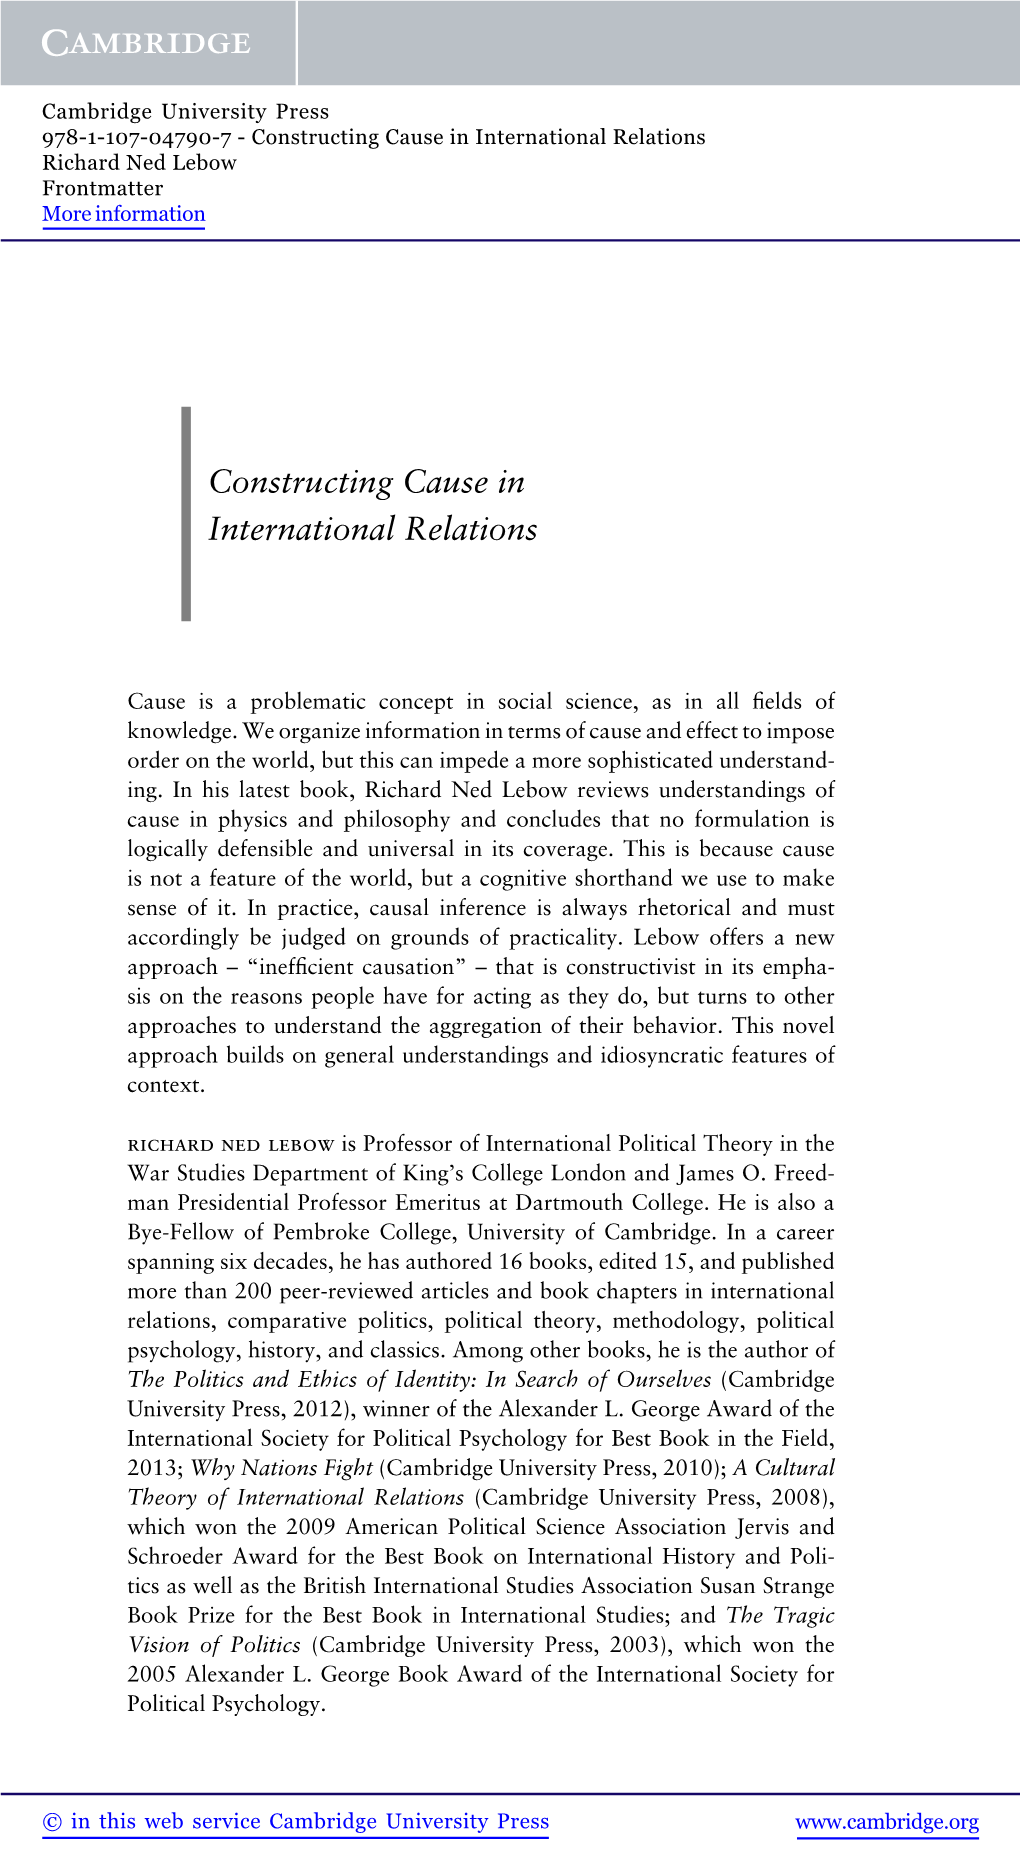 Constructing Cause in International Relations Richard Ned Lebow Frontmatter More Information